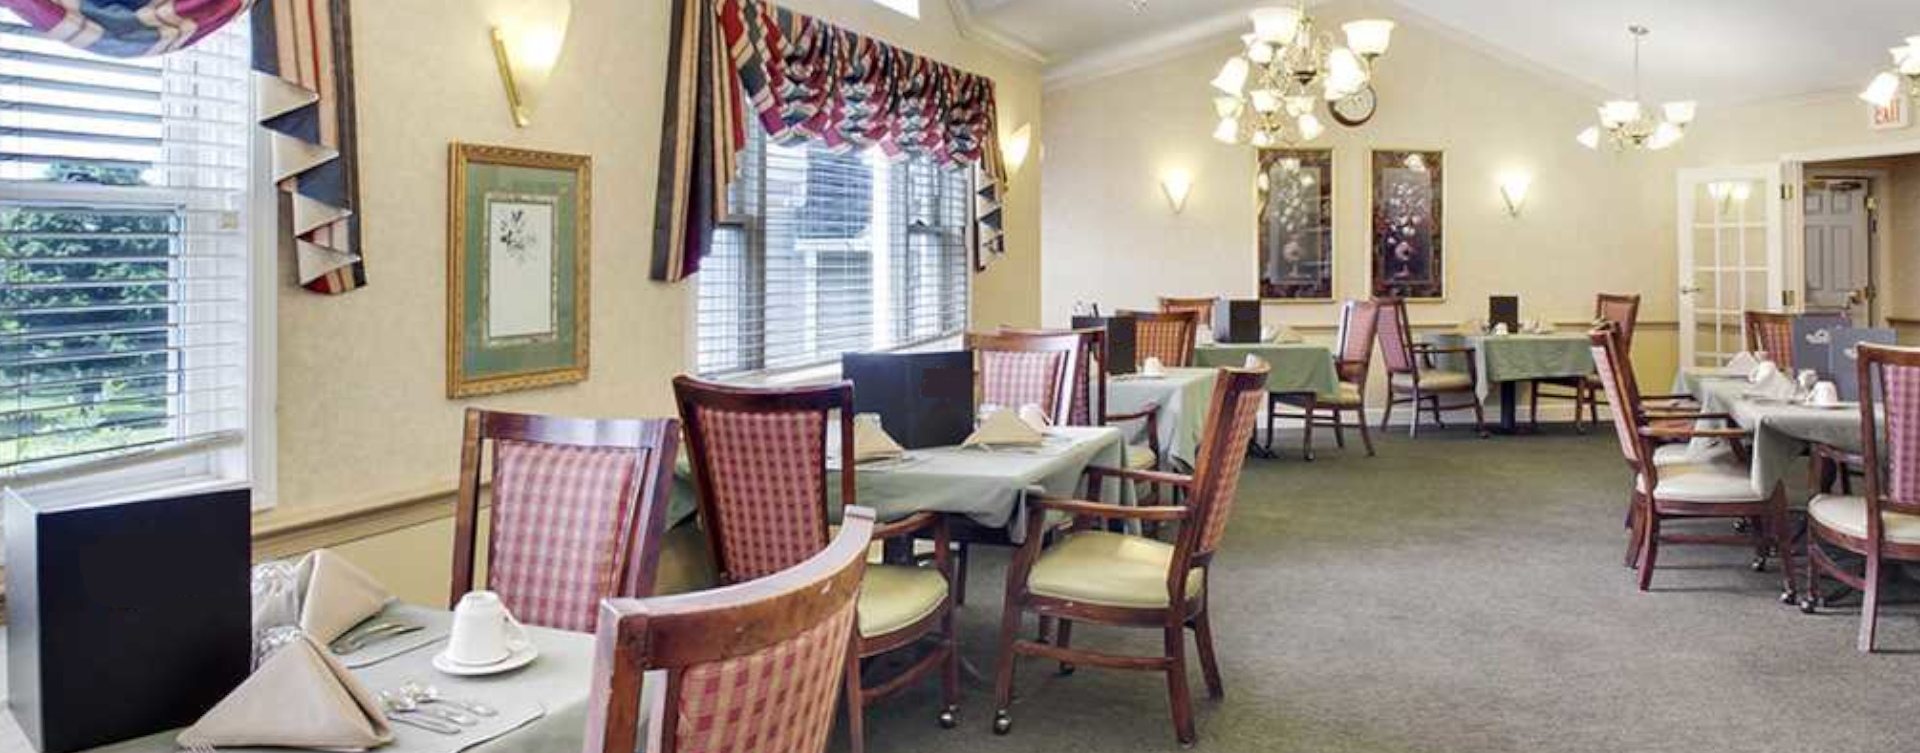 Enjoy homestyle food with made-from-scratch recipes in our dining room at Bickford of Upper Arlington